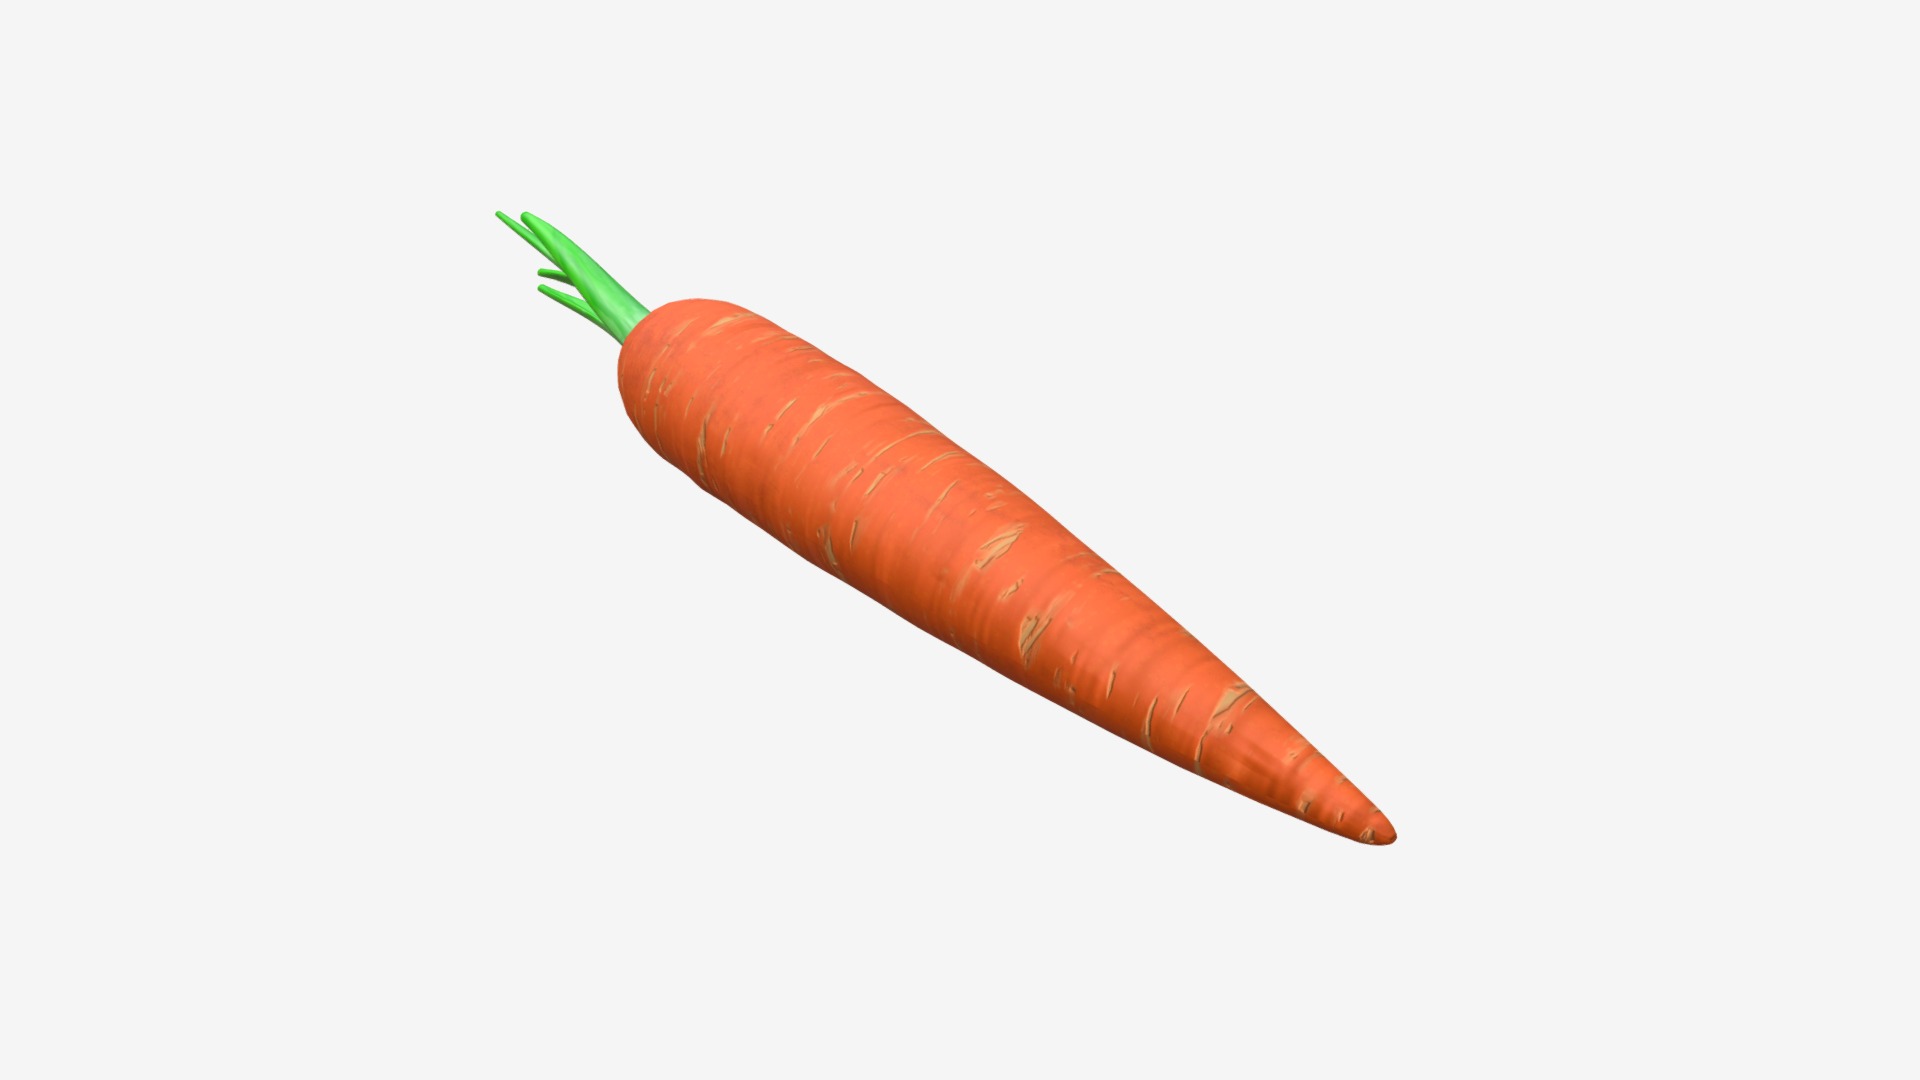 3D model Carrot 01 - This is a 3D model of the Carrot 01. The 3D model is about a carrot with a green stem.